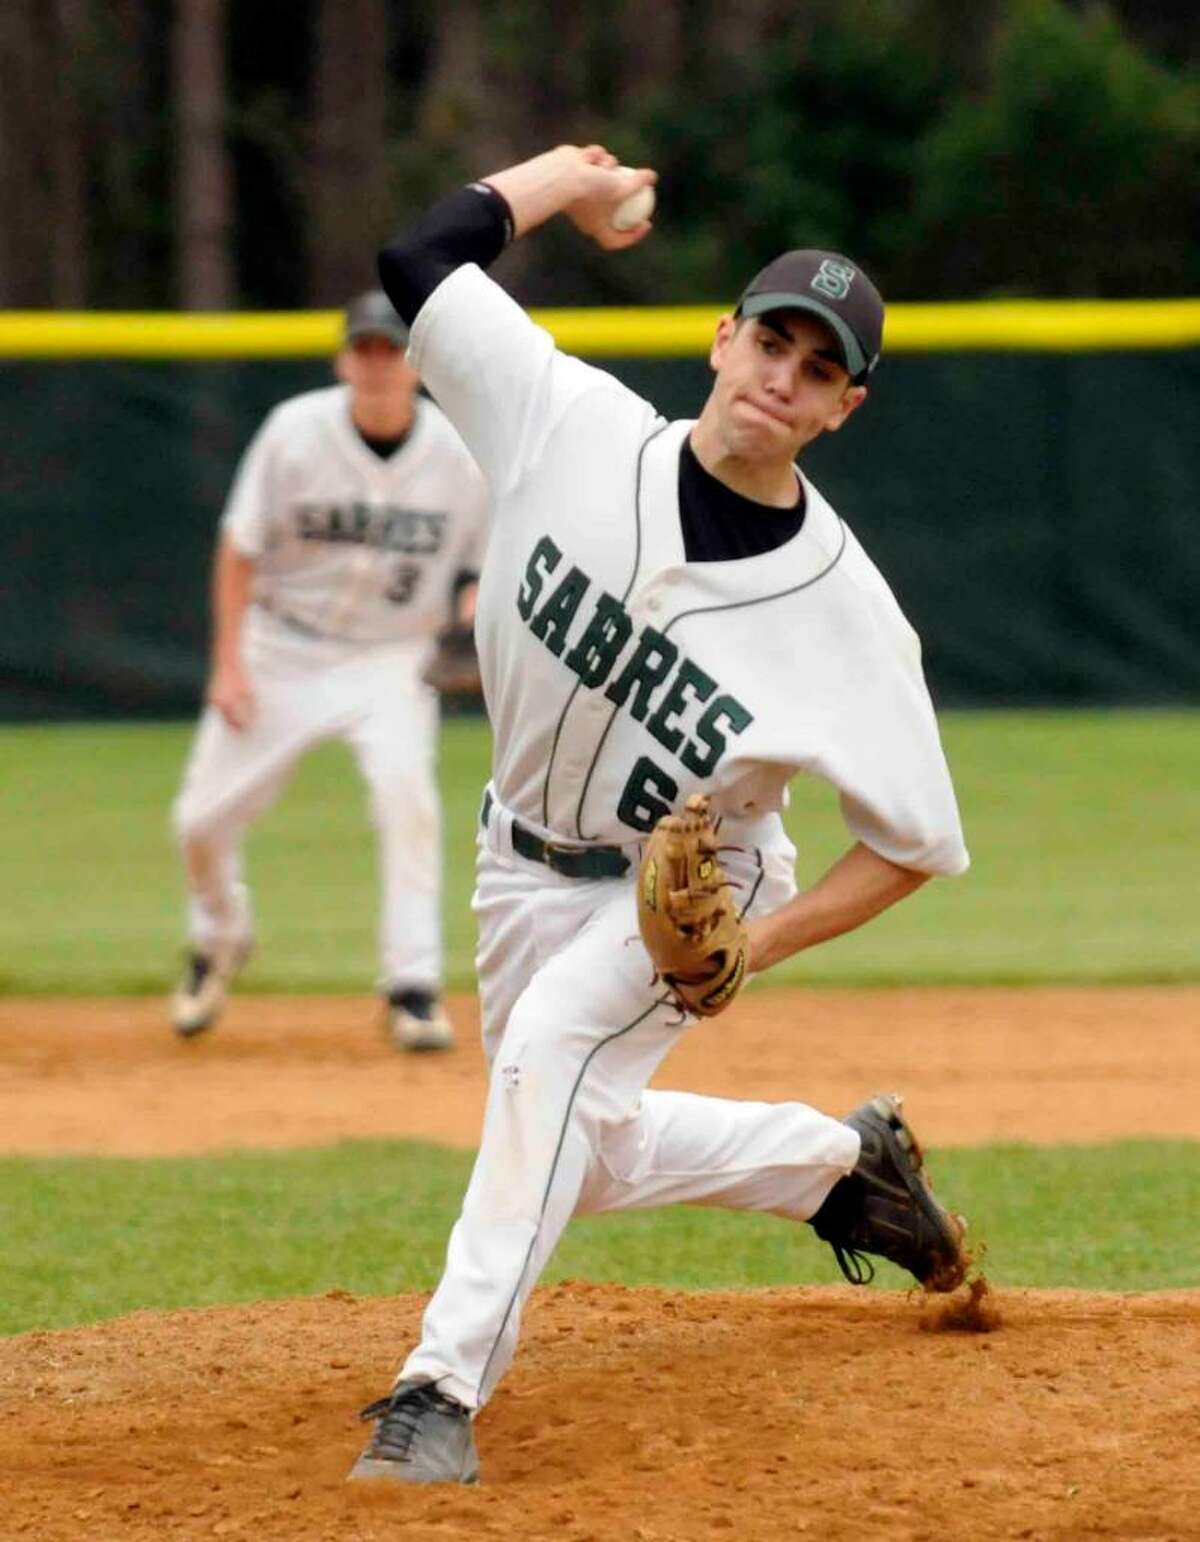 Schalmont's Joe Amorosi is 7-0 for the season with a 1.16 earned-run average after he pitched the Sabres to a 4-0 Colonial Council victory over Lansingburgh on Tuesday in Rotterdam. ( Michael P. Farrell / Times Union )